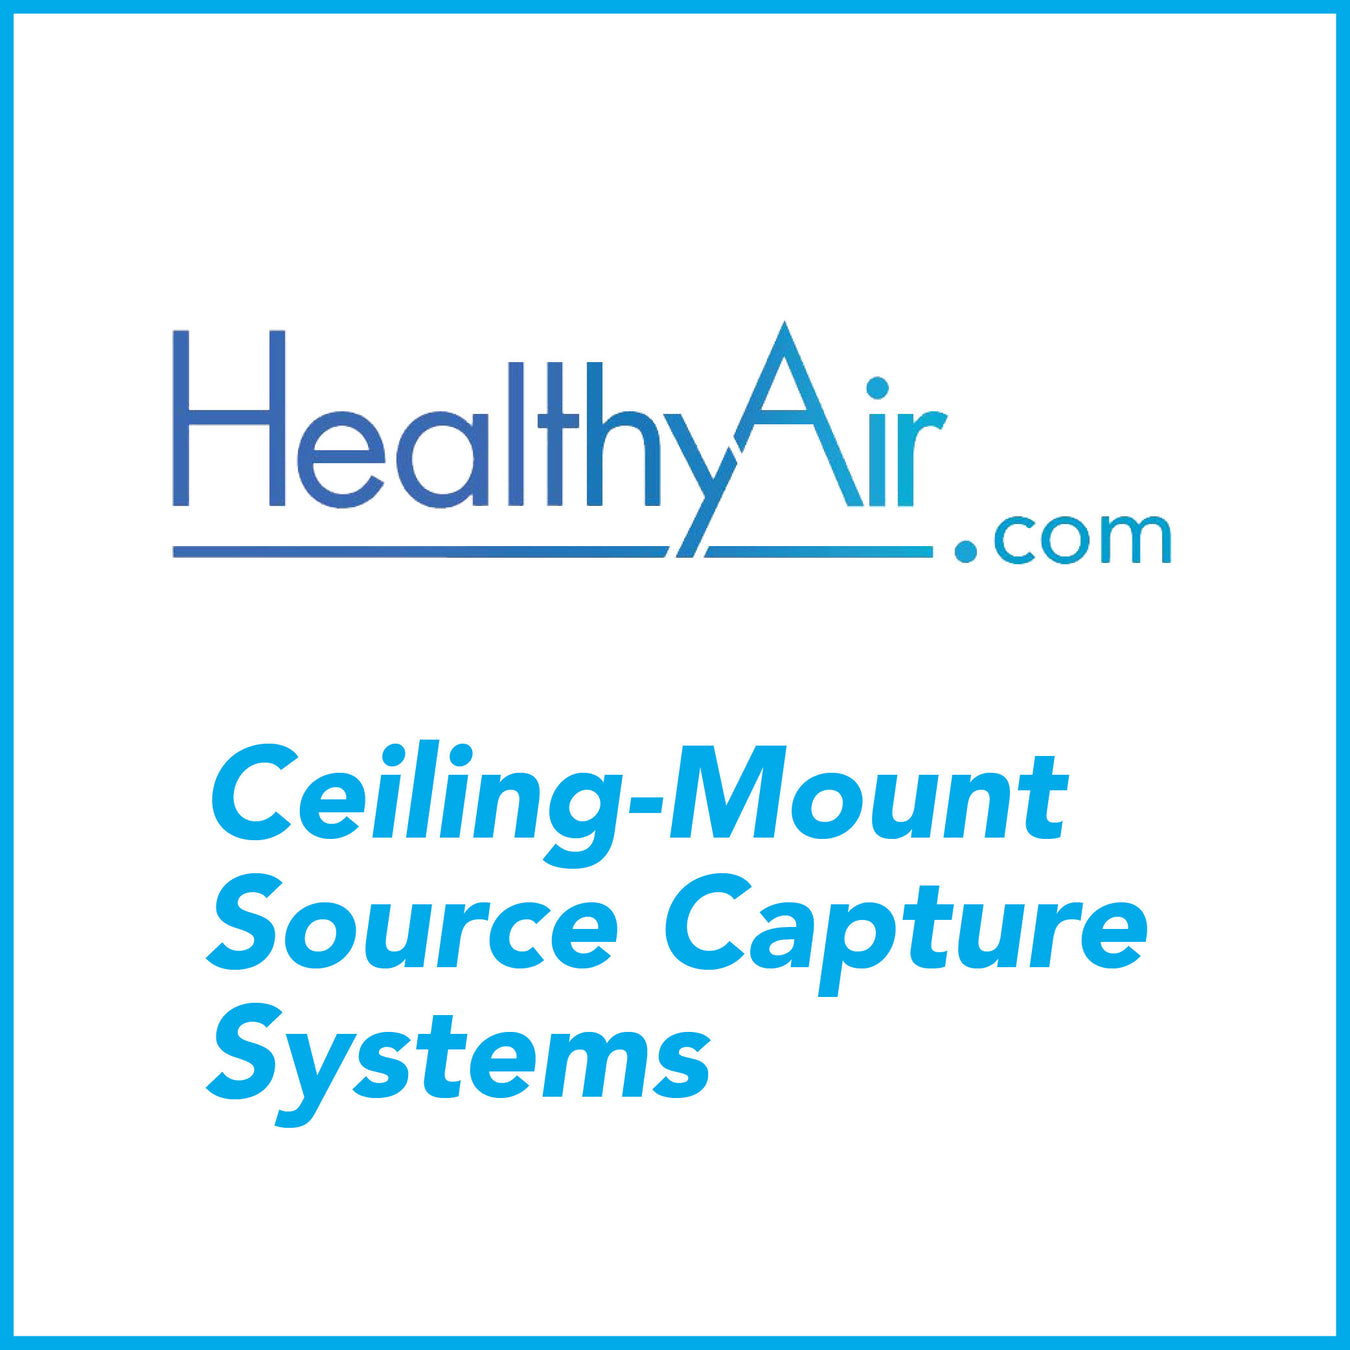 Source Capture Systems - Ceiling-Mount - Healthy Air Inc.